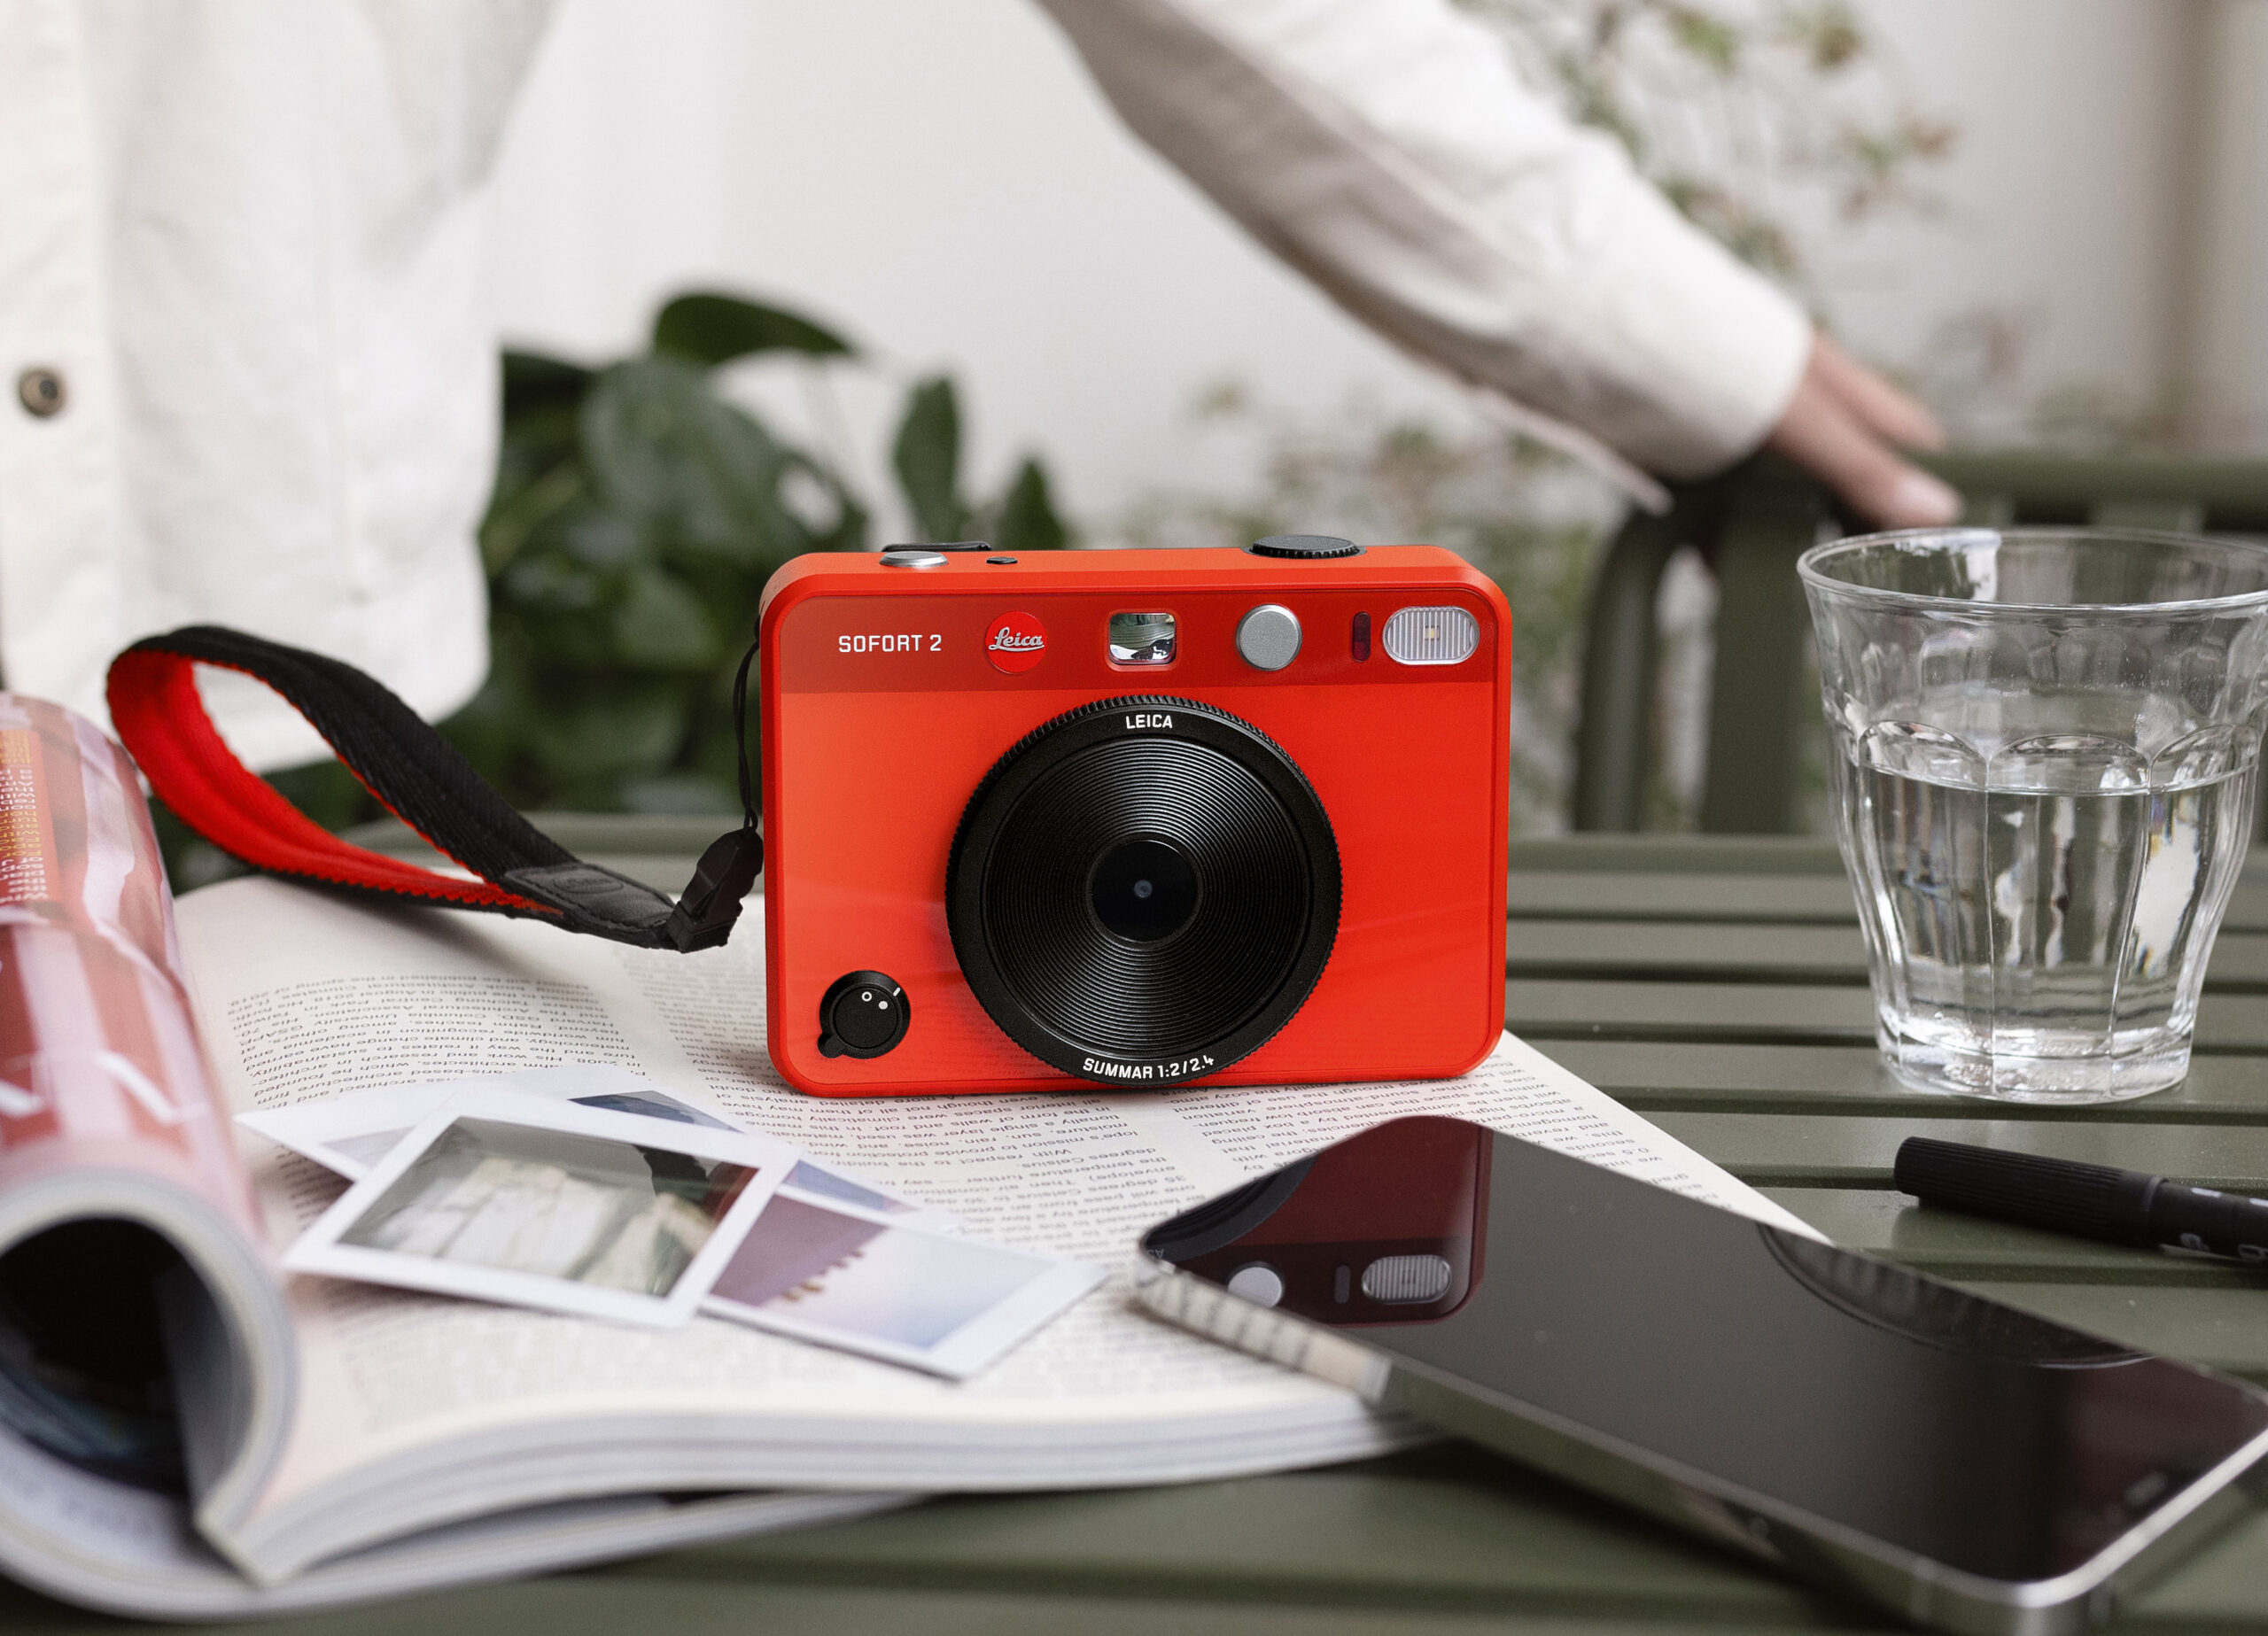 Leica’s new Sofort 2 hybrid instant camera is cheapest Leica available today